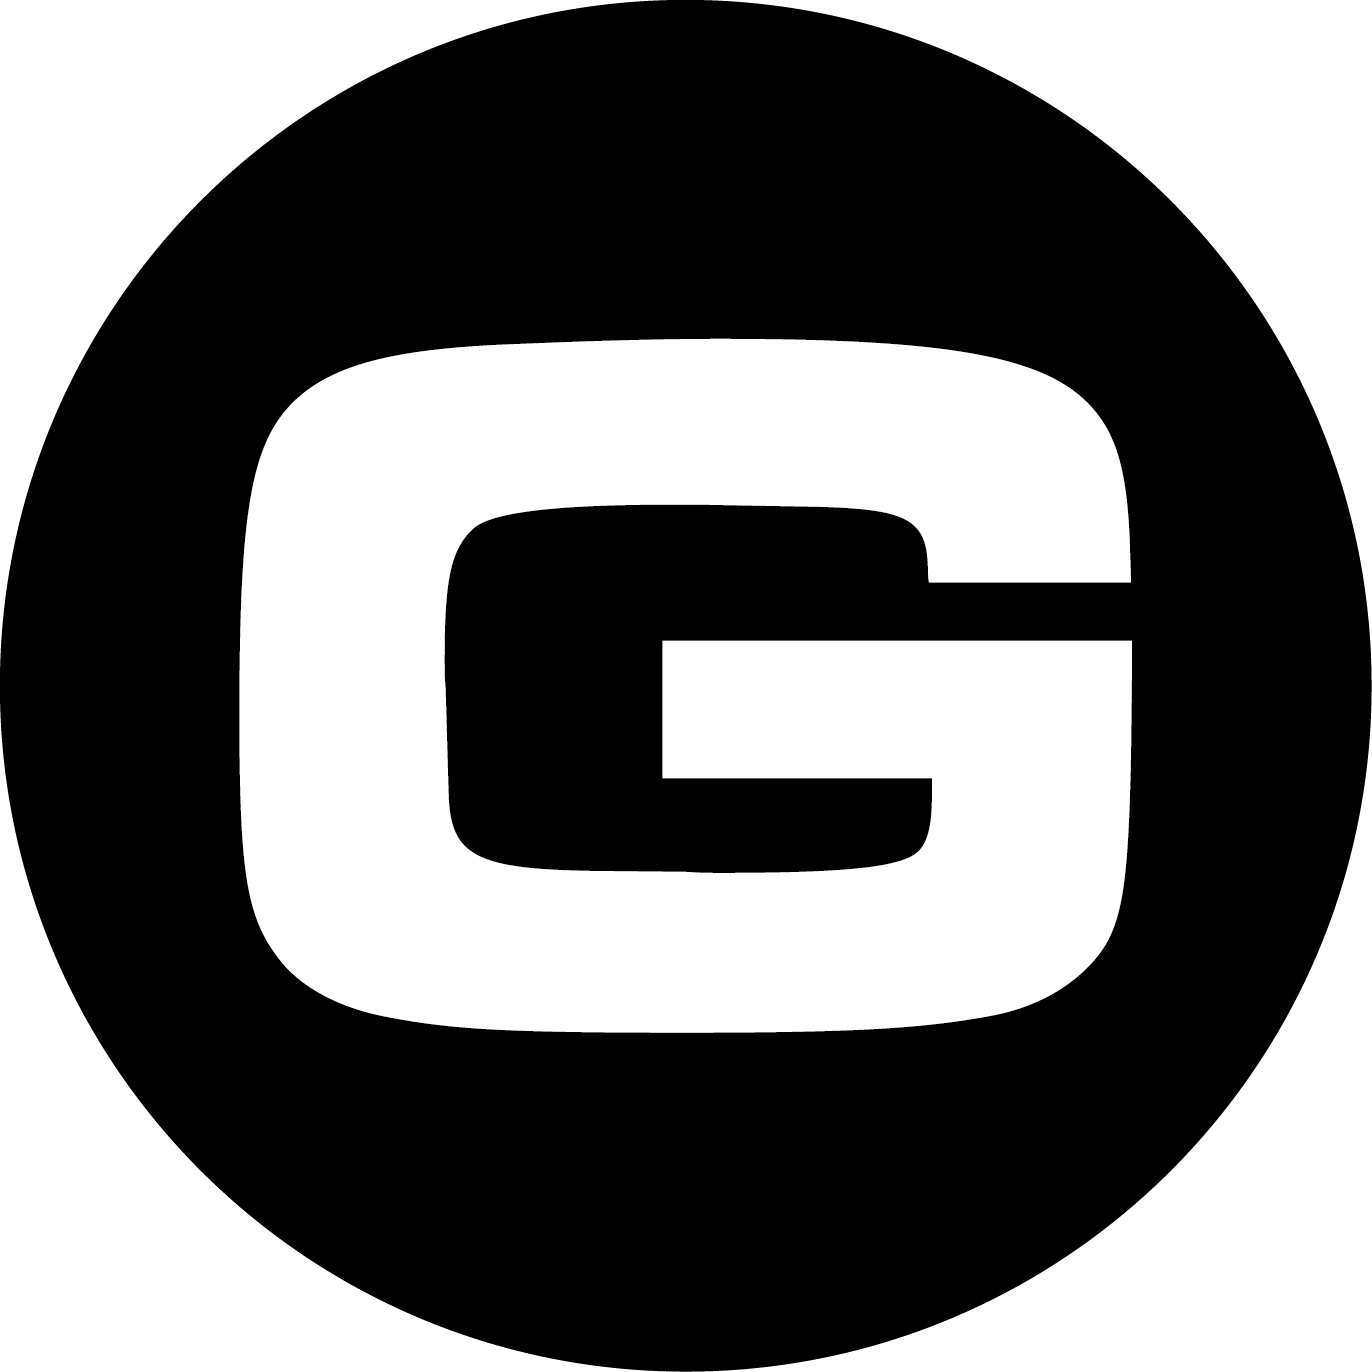 G in Circle Logo - Pages - Guestlist